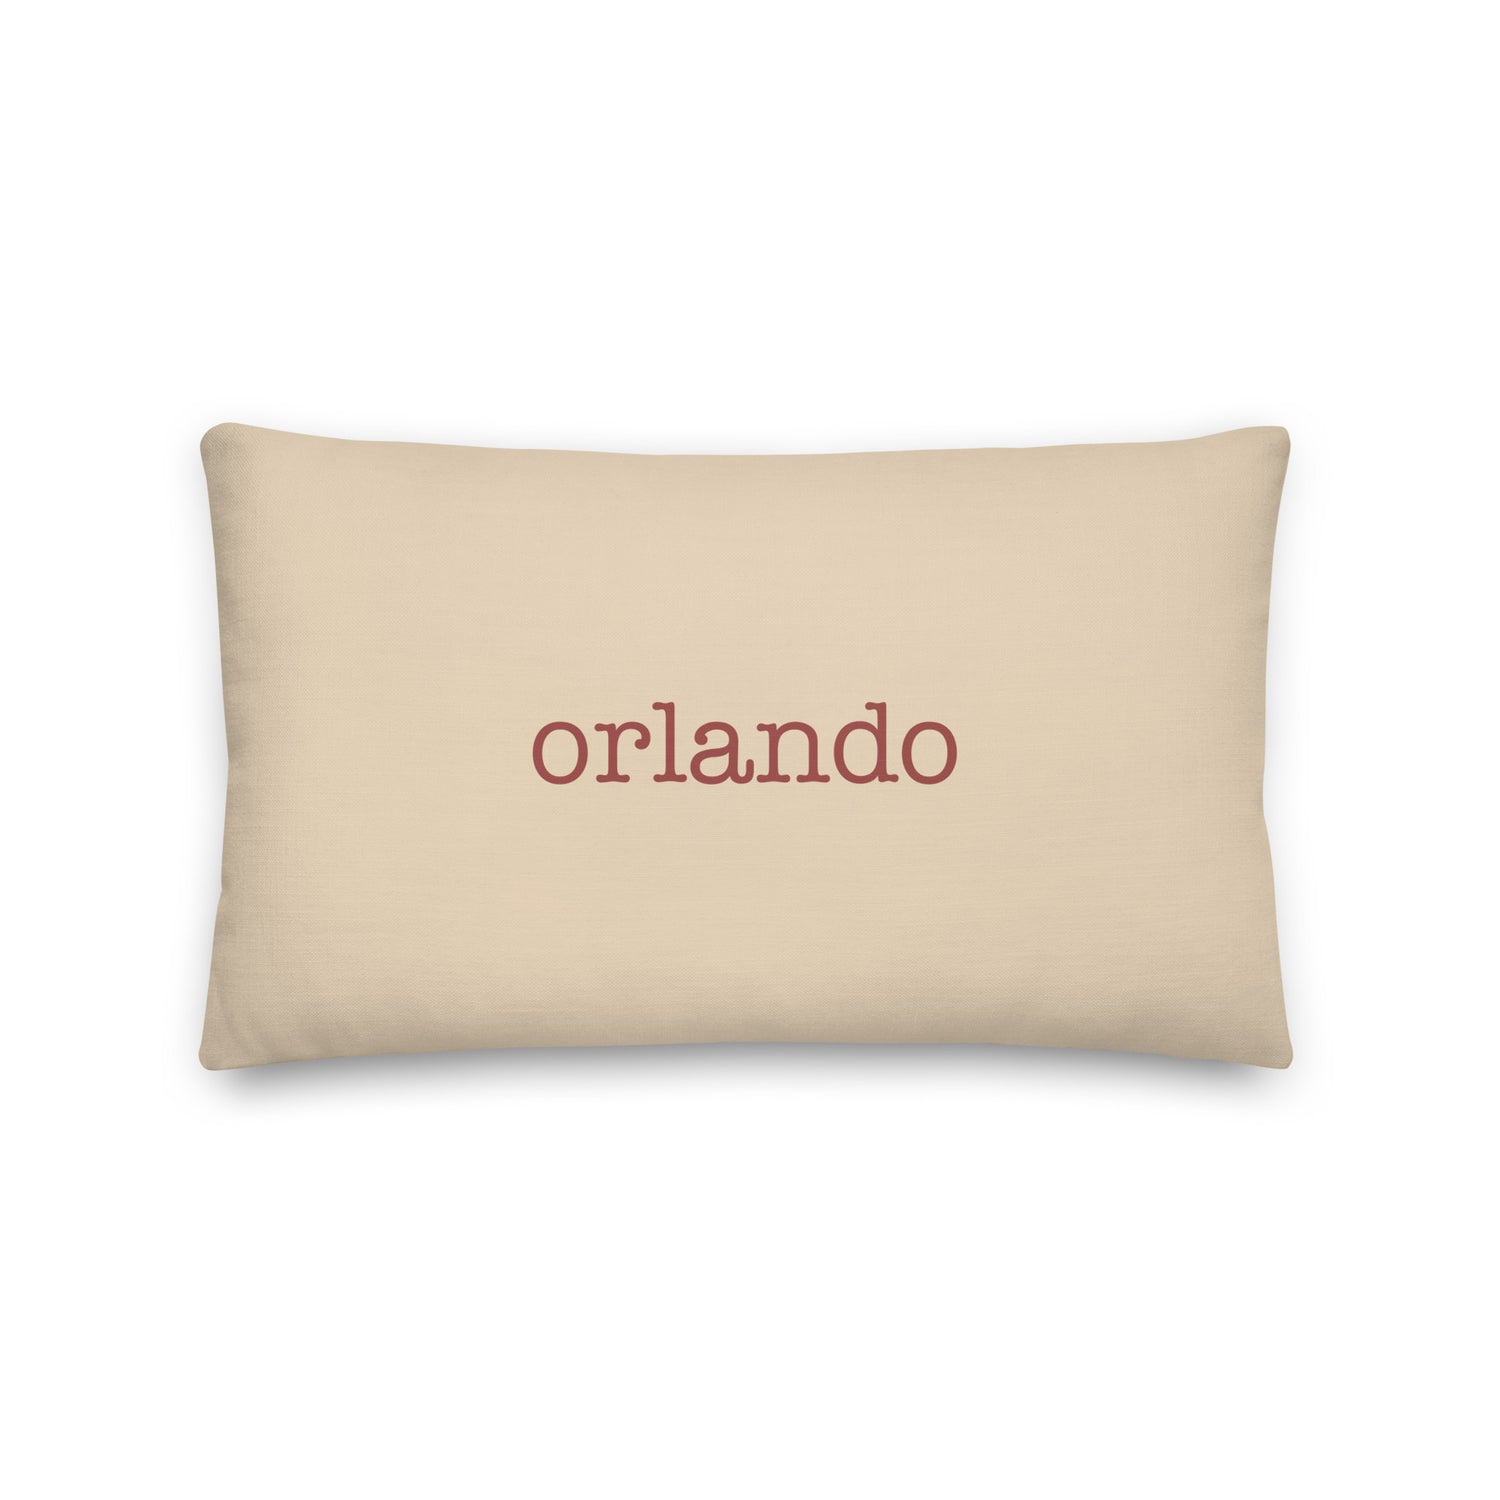 Orlando Florida Pillows and Blankets • ORL Airport Code